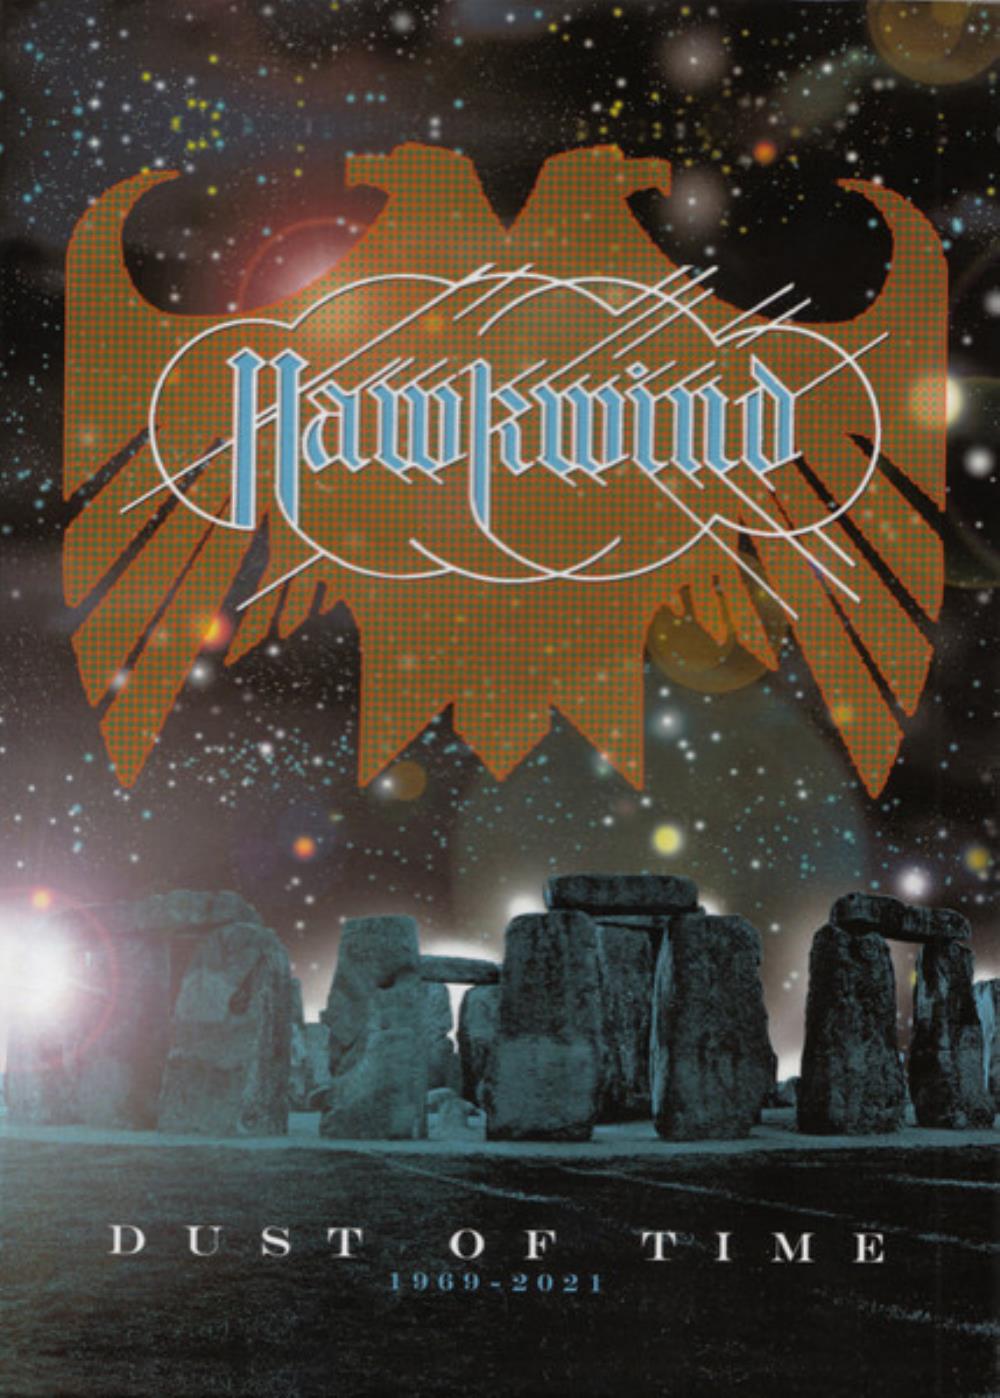 Hawkwind Dust of Time: 1969-2021 [6CD edition] album cover